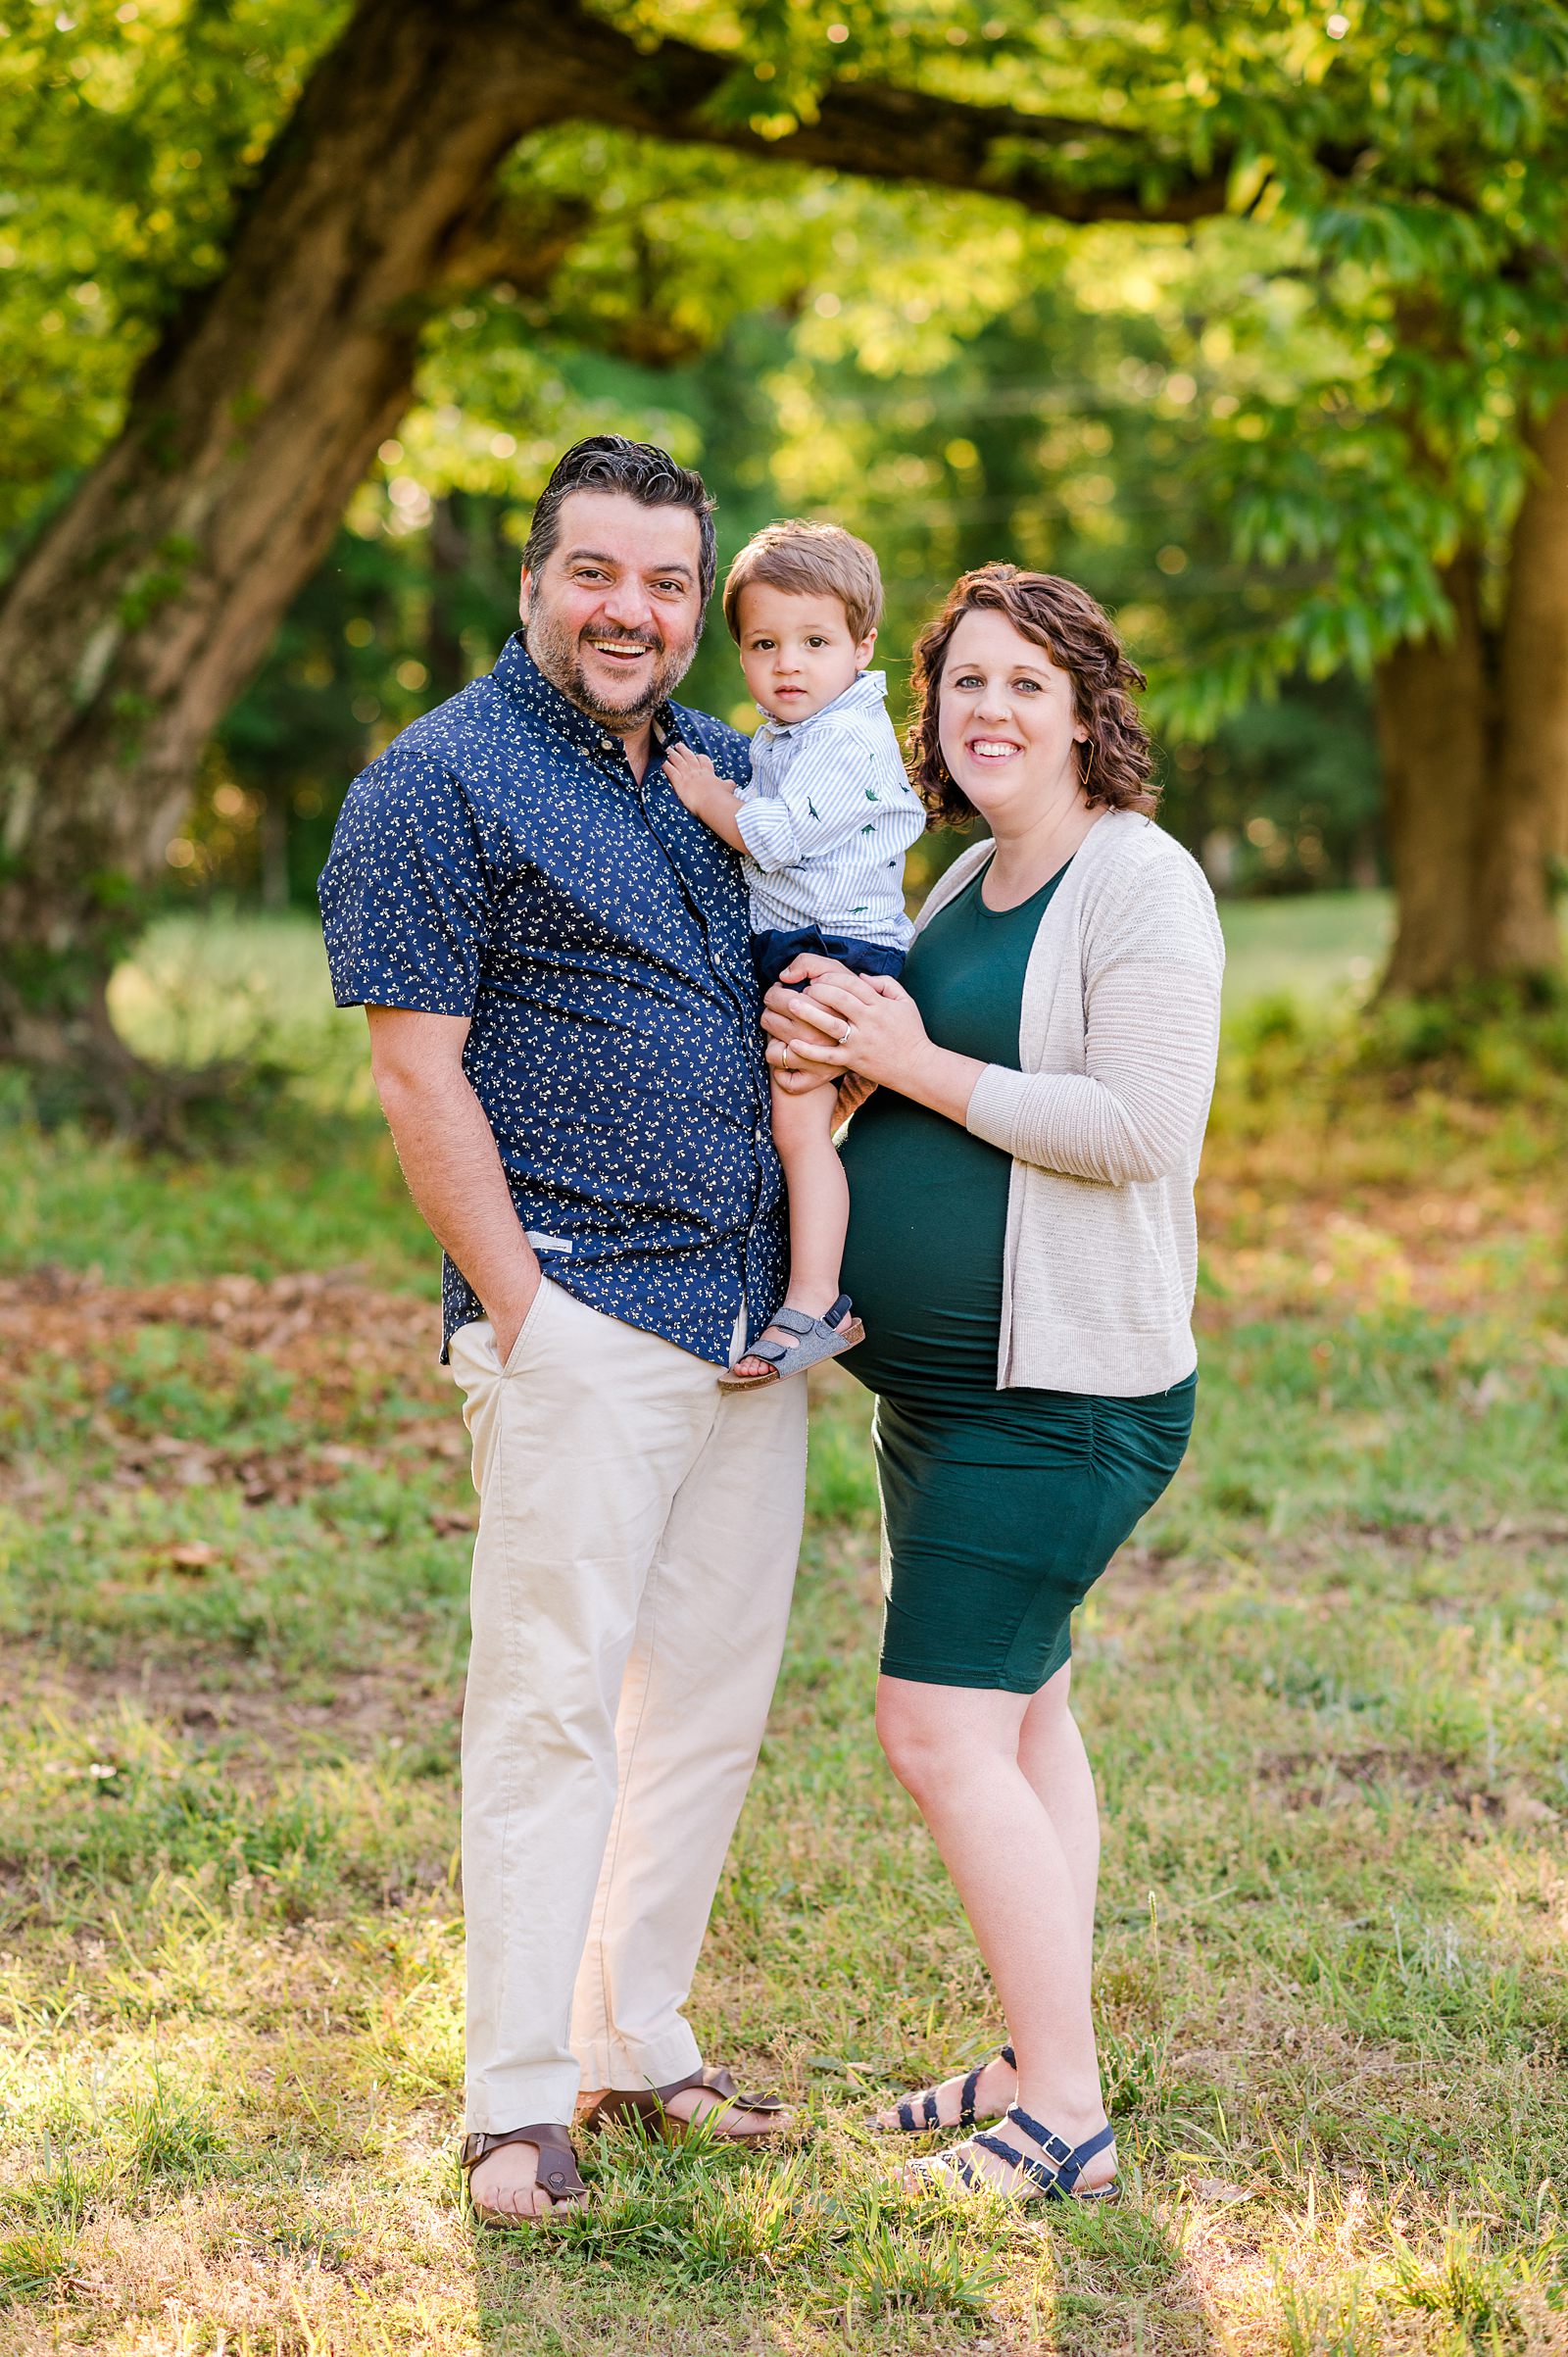 2020 Richmond Spring Mini Sessions at Rural Plains Park with Mechanicceslville Family Photographer Kailey Brianne Photography. 